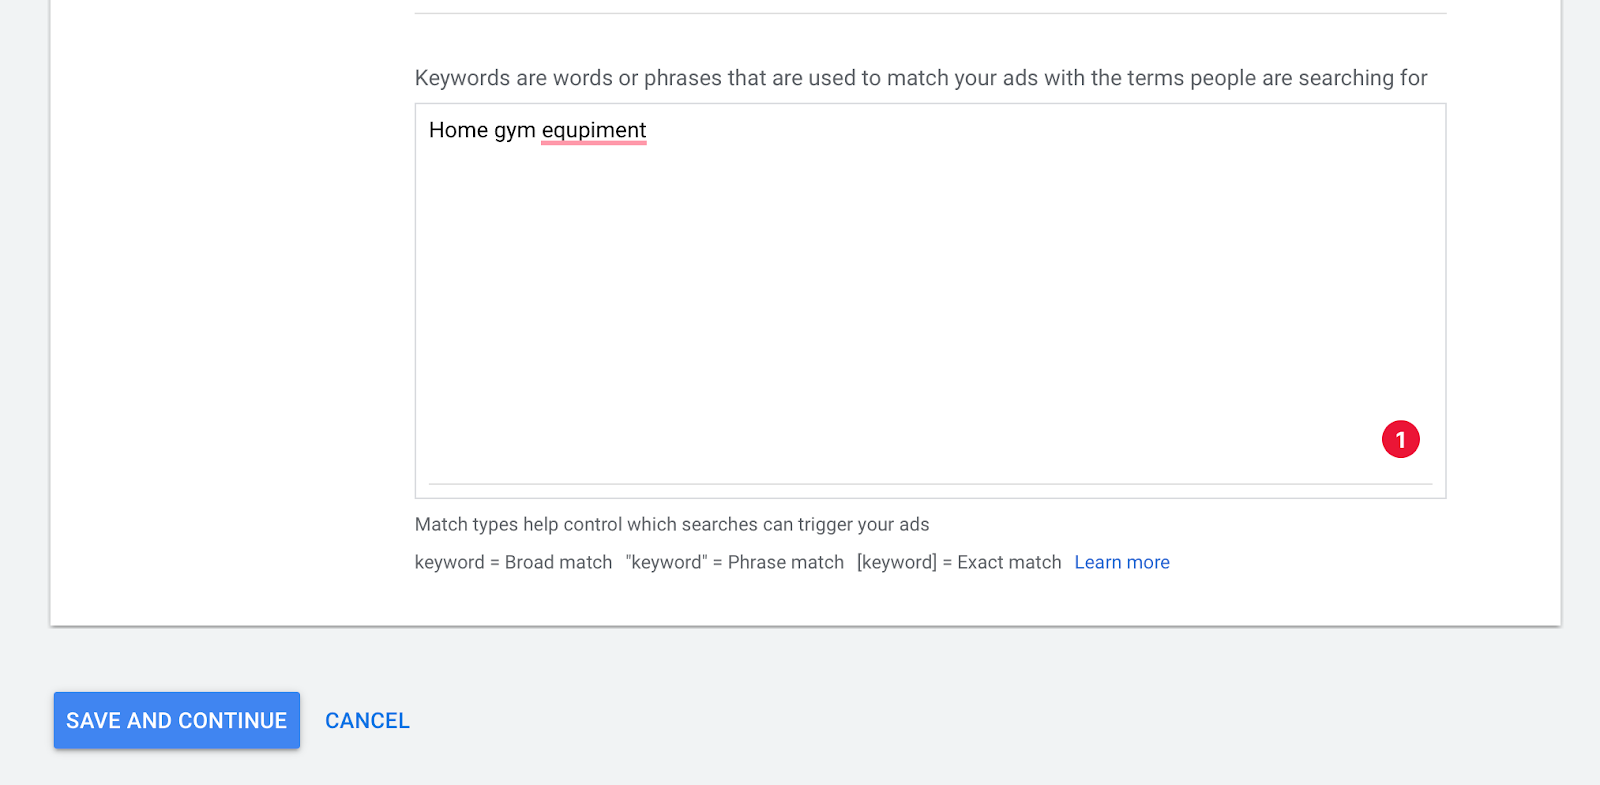 Google Ads campaign creation tool showing a single keyword 